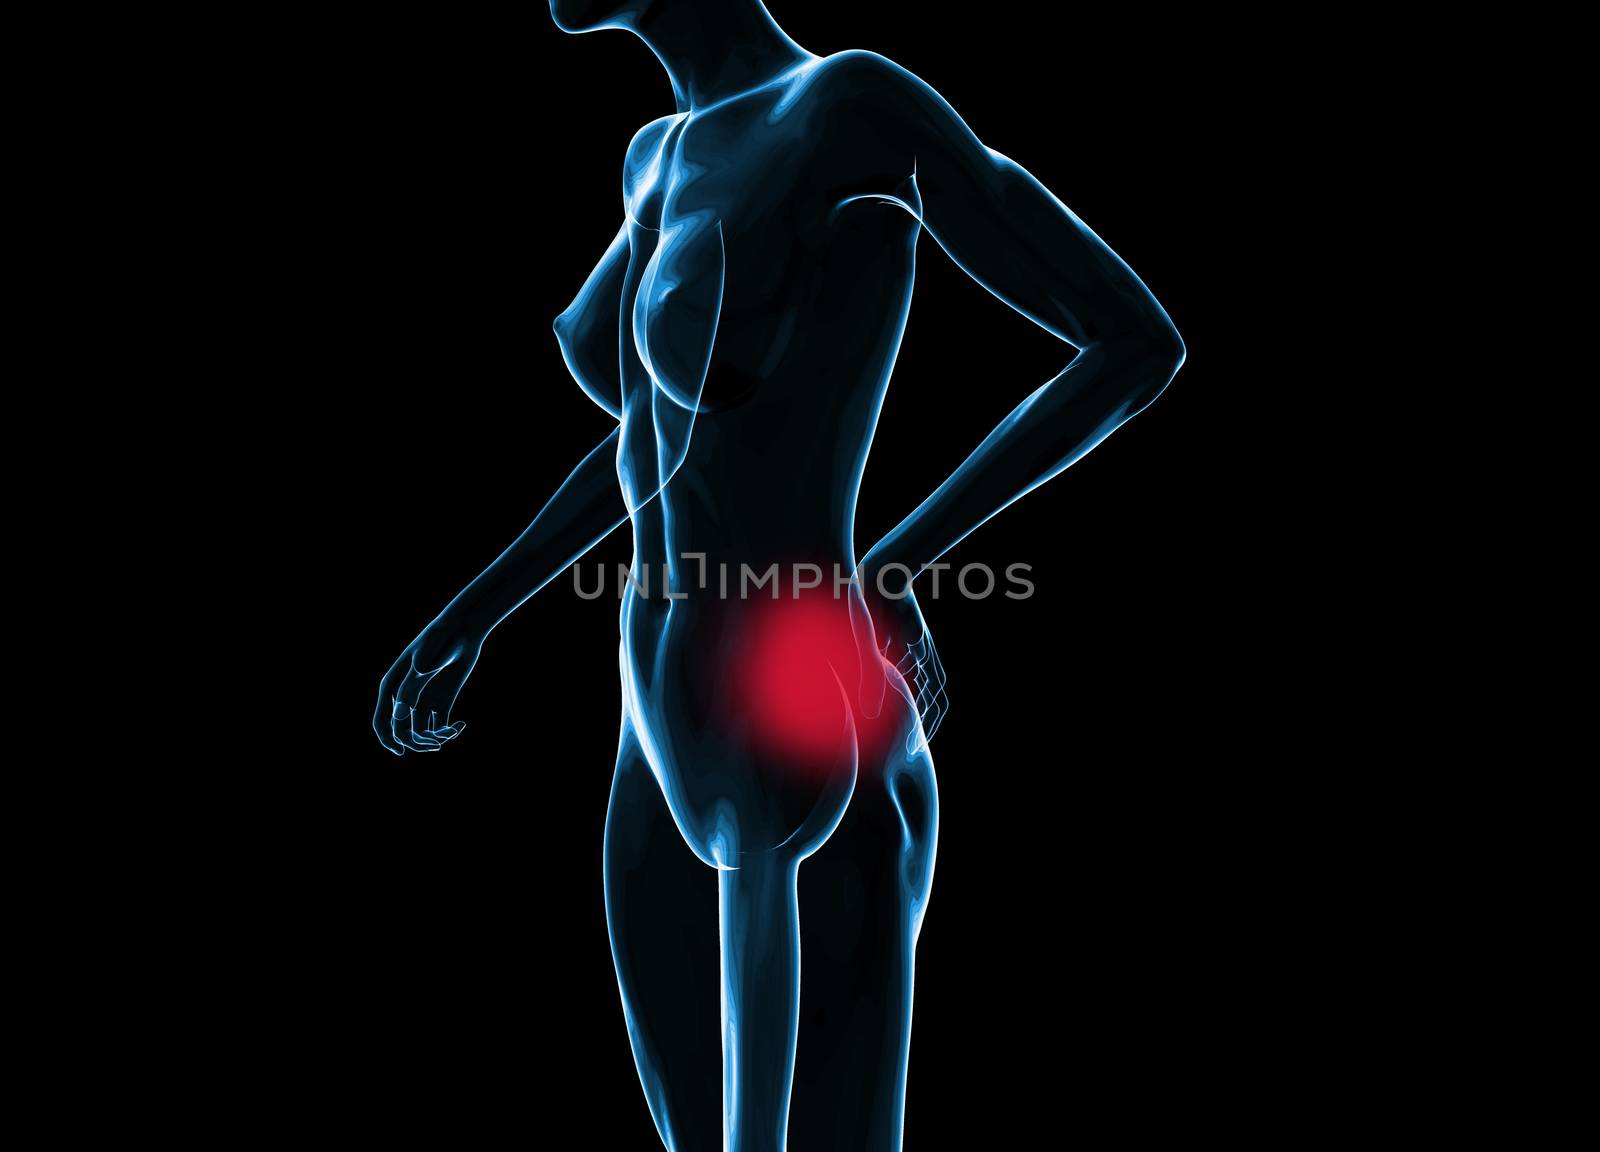 Female woman torso made of glass or bubble, pain in the back isolated on black background. 3d rendered medical illustration.